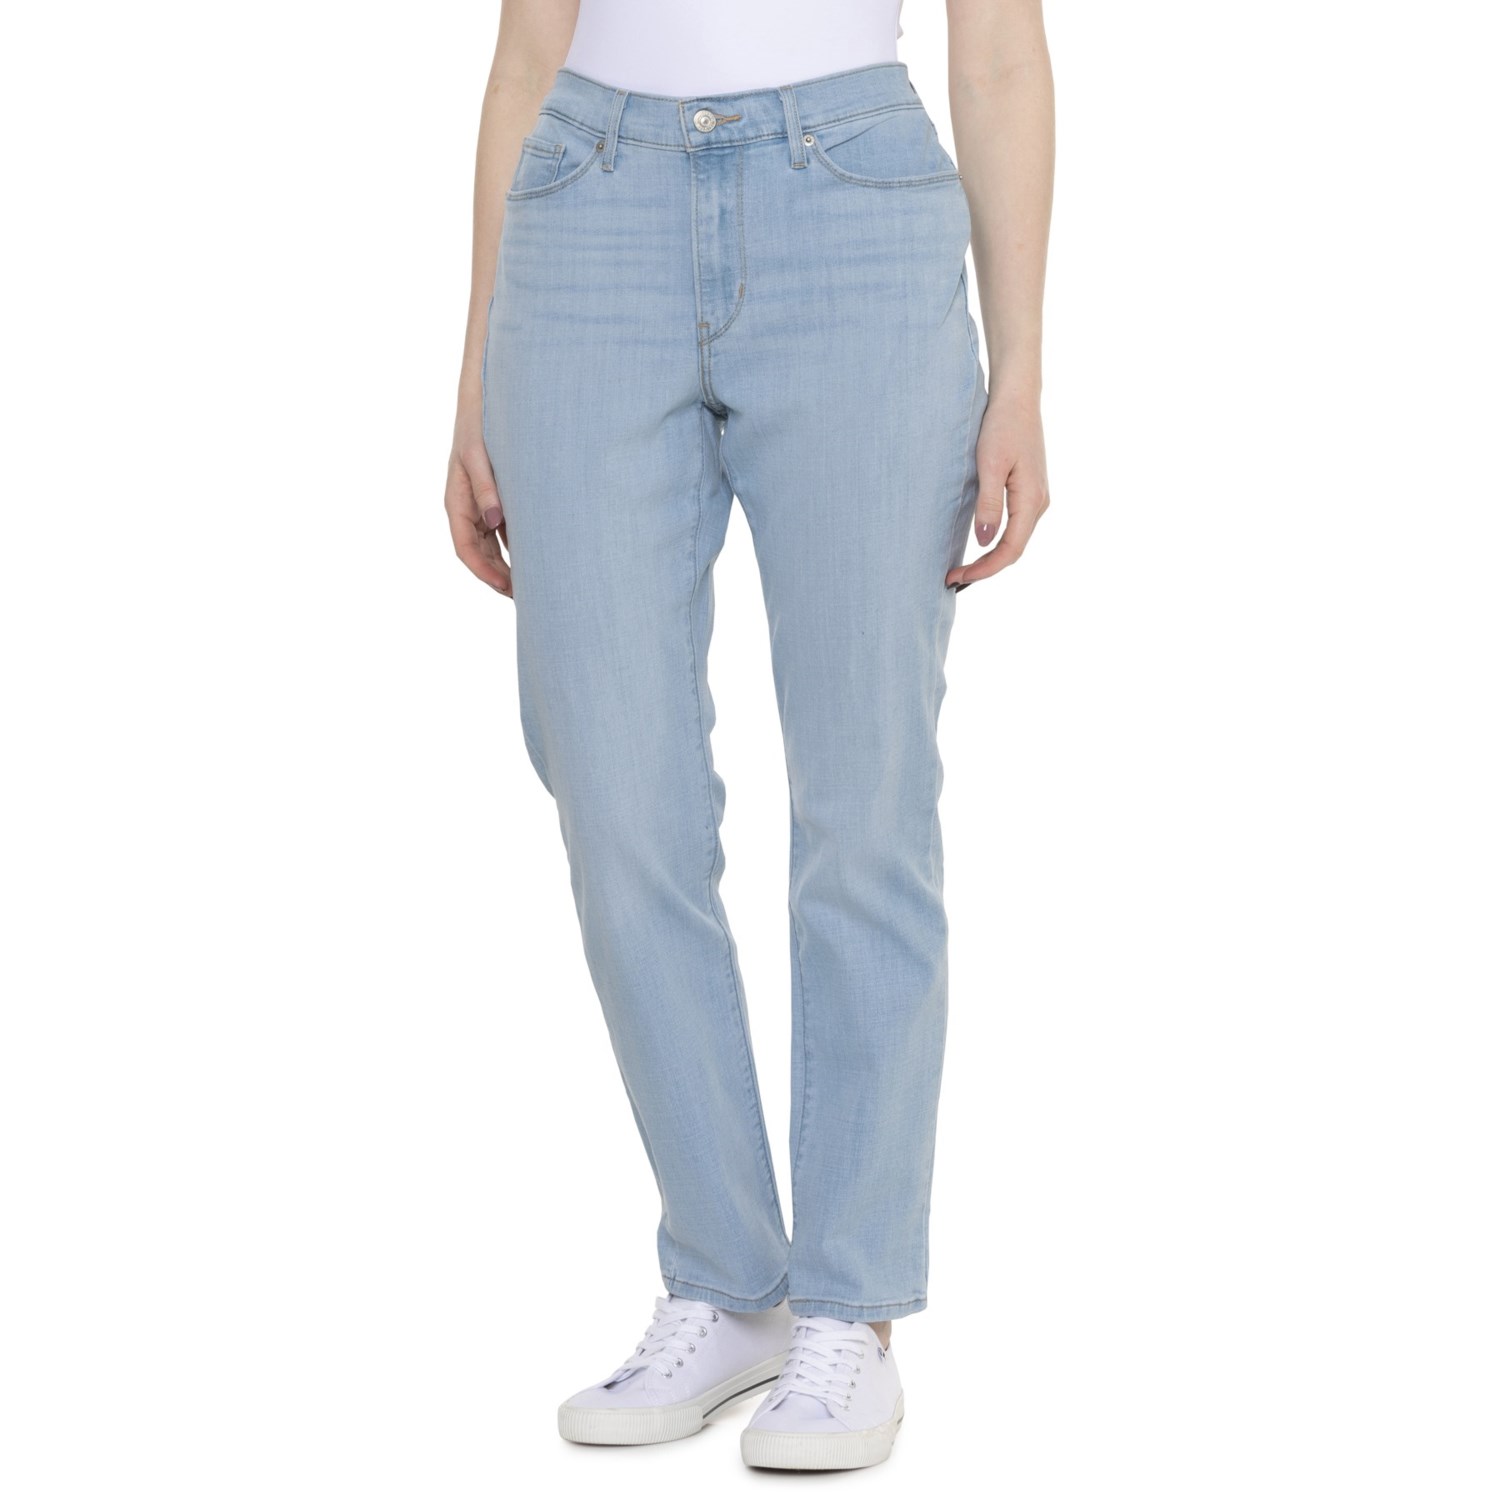 Levi's Classic Straight Jeans - Save 41%